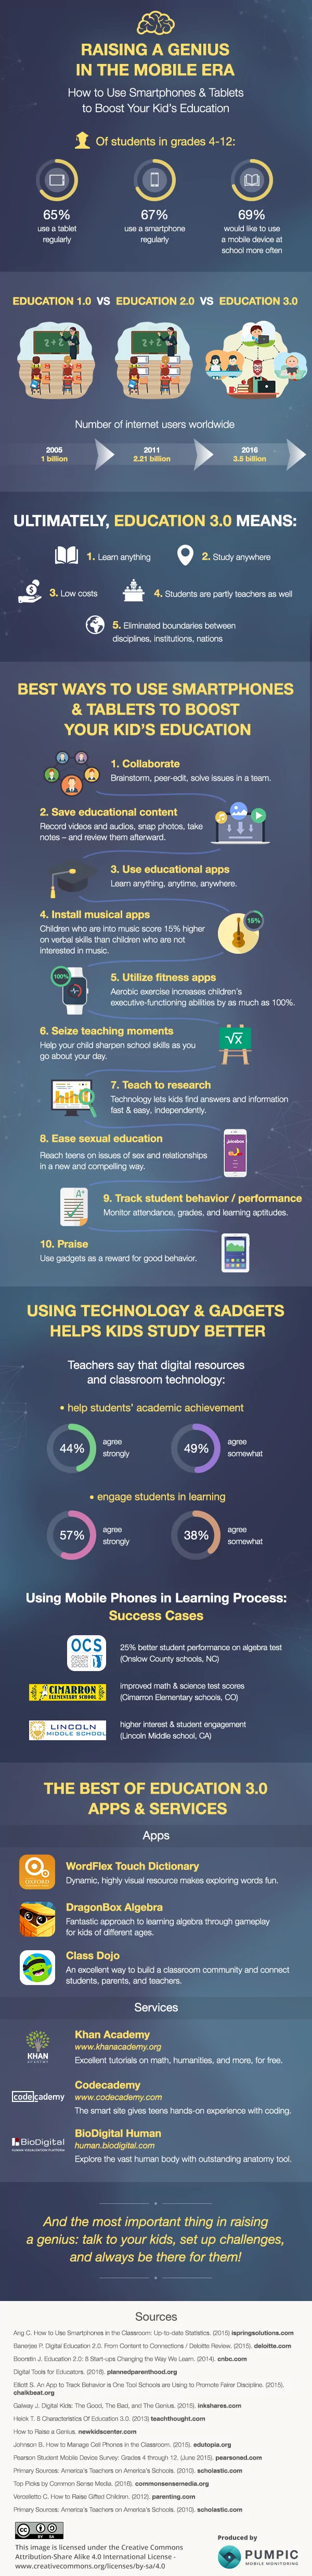 10 ways to use mobile technology to boost kids learning